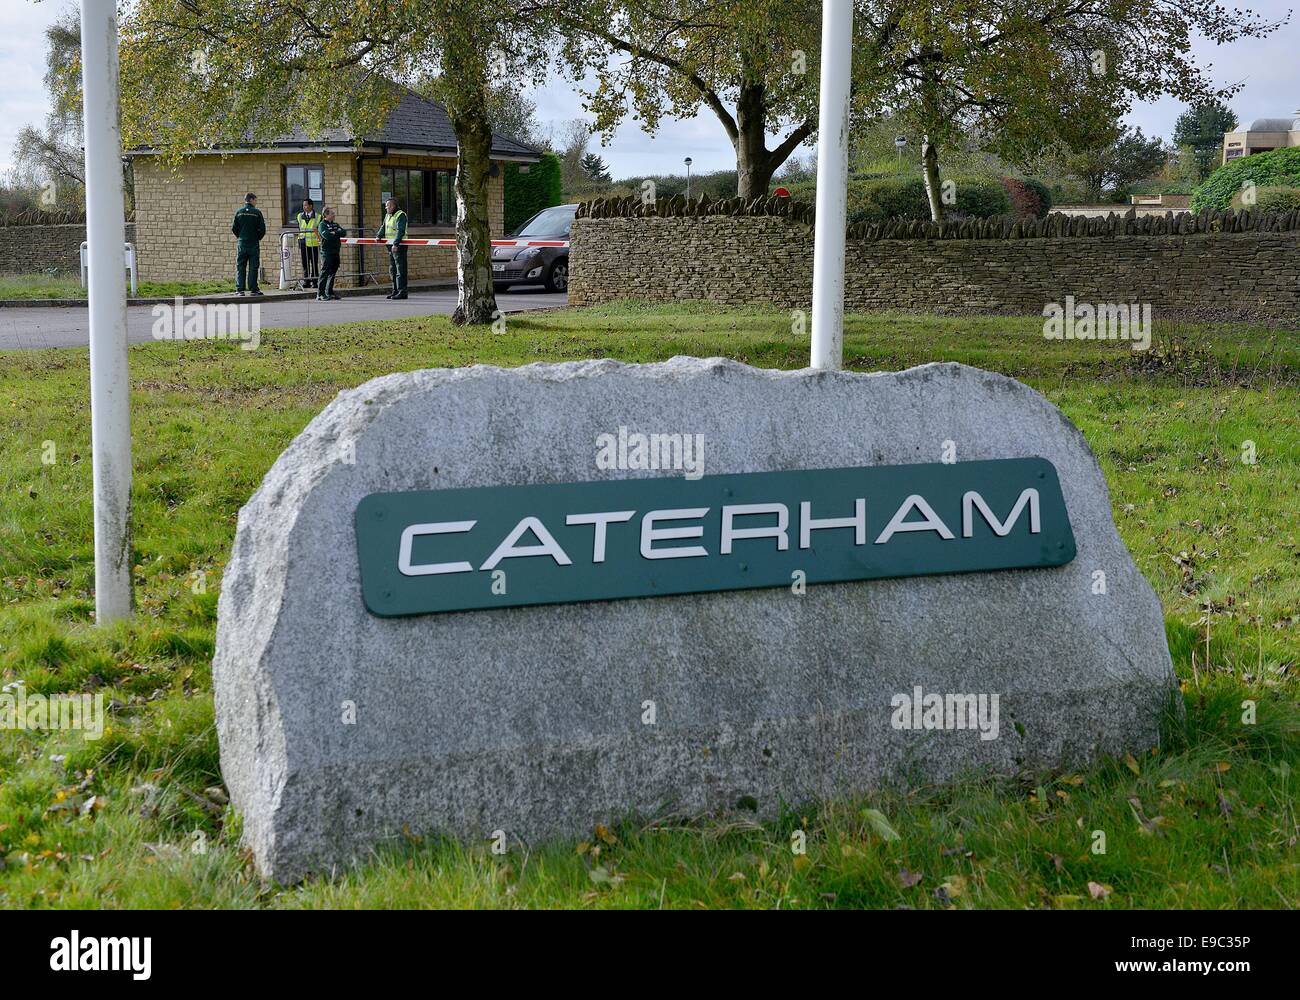 Staff from the Caterham F1 Team by the gate of the Leafield Technical Centre. PICTURE BY SIMON WILLIAMS 23/10/14 PICTURE CATCHLINE Caterham F1 Lockout LENGTH lead REQUESTED BY Lucy Ford Stock Photo